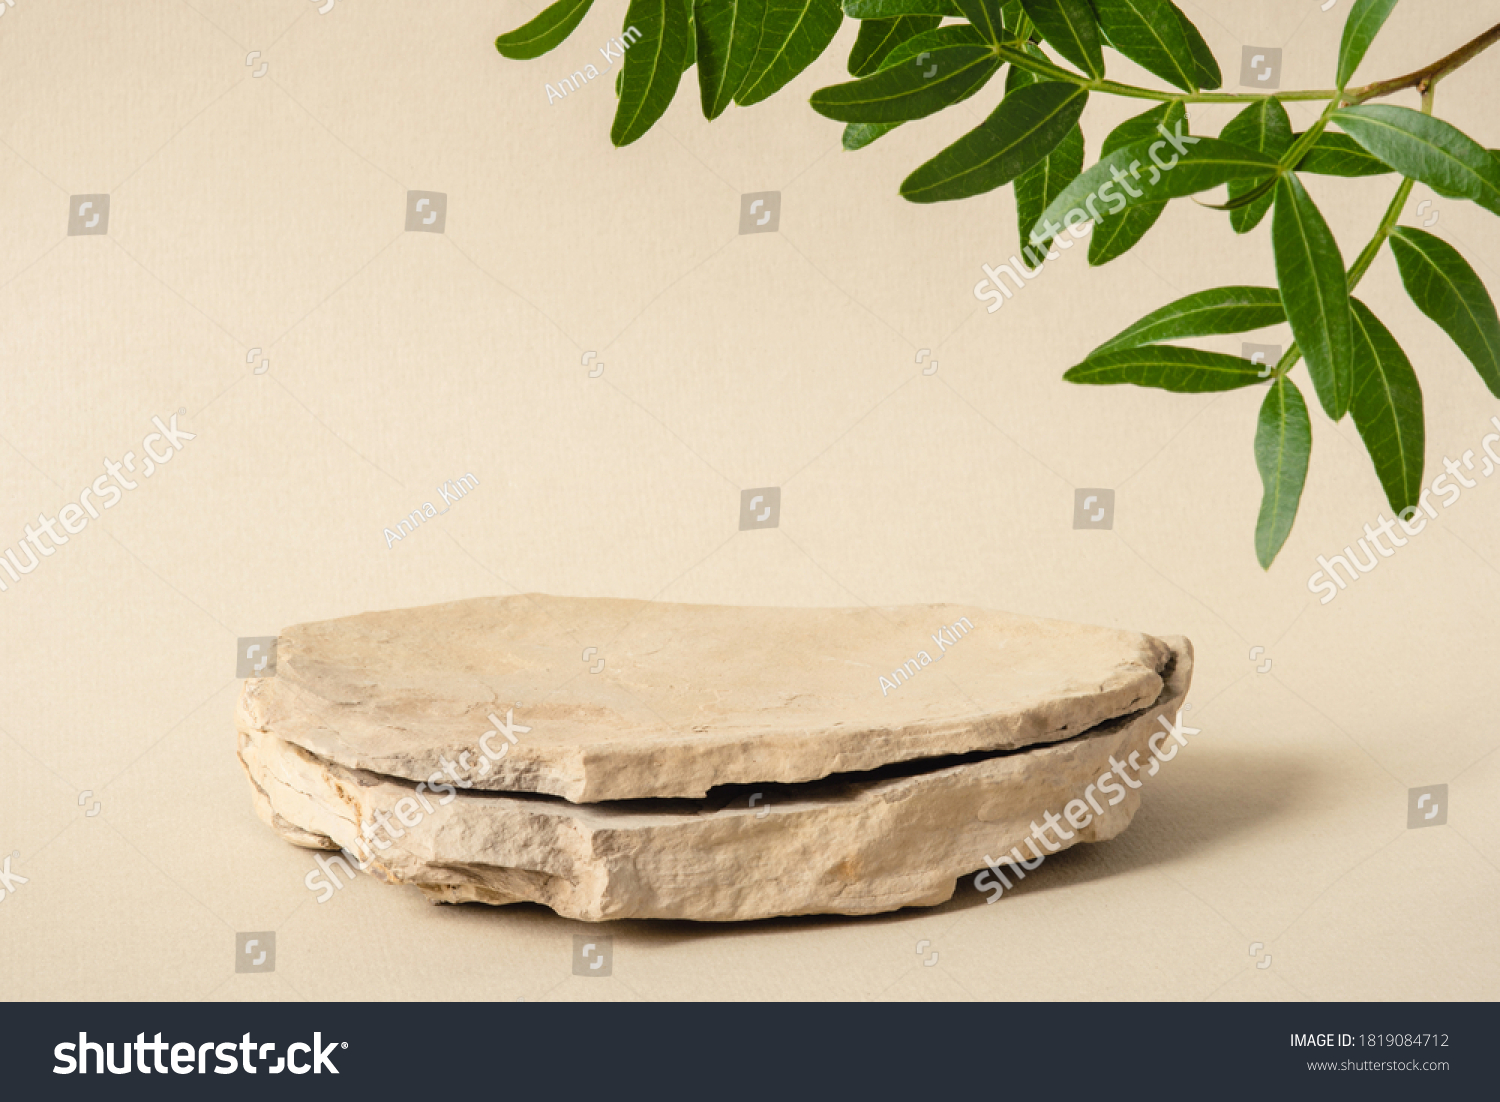 Background for cosmetic products of natural beige color. Stone podium with green leaves. Front view. #1819084712